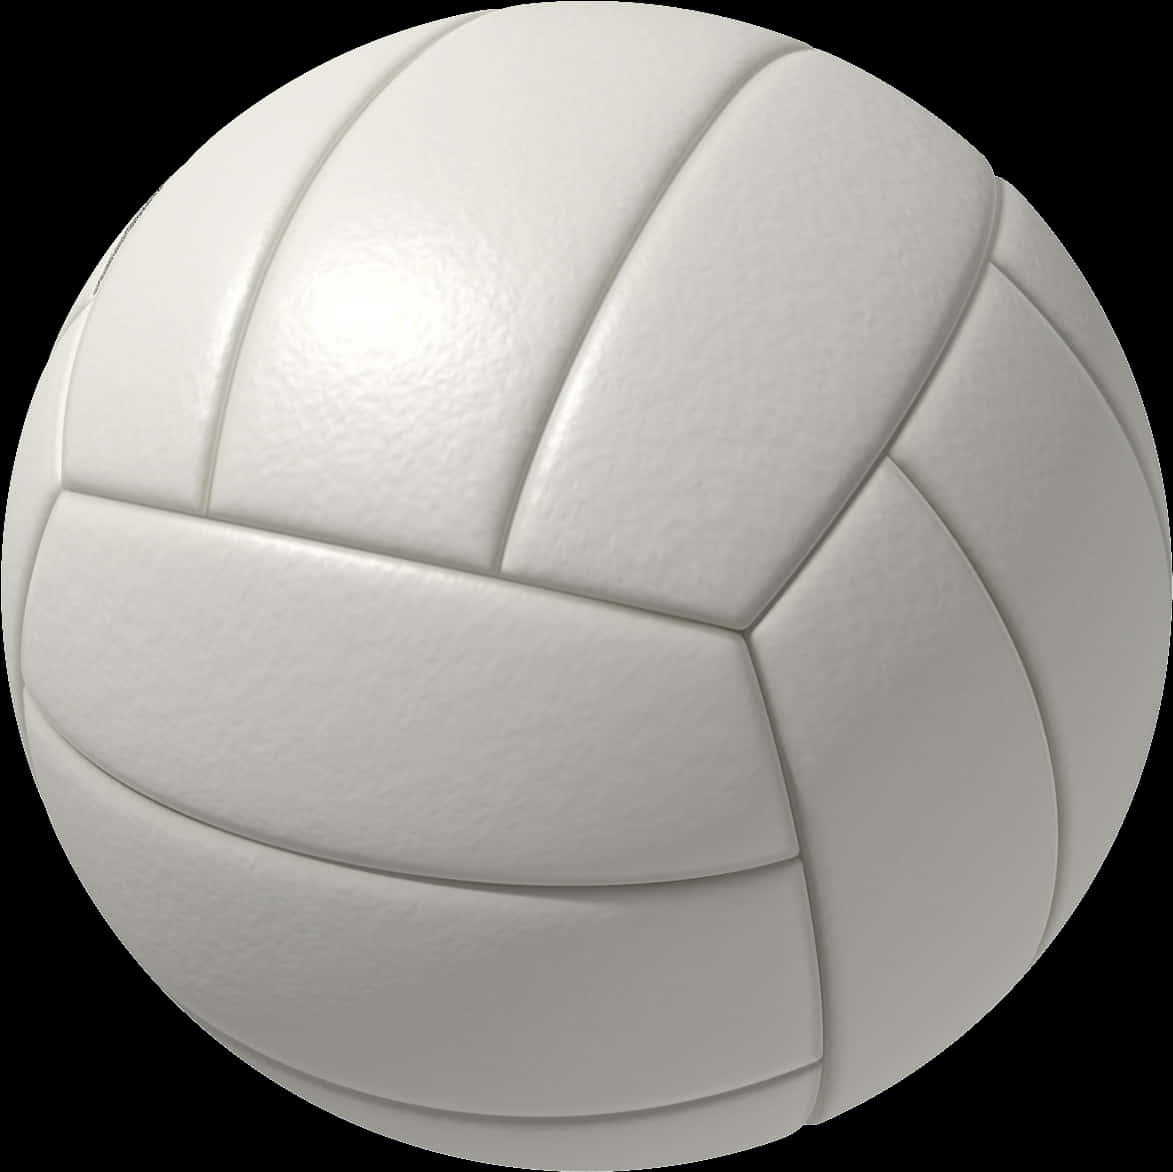 Volleyball Isolatedon Black Background PNG